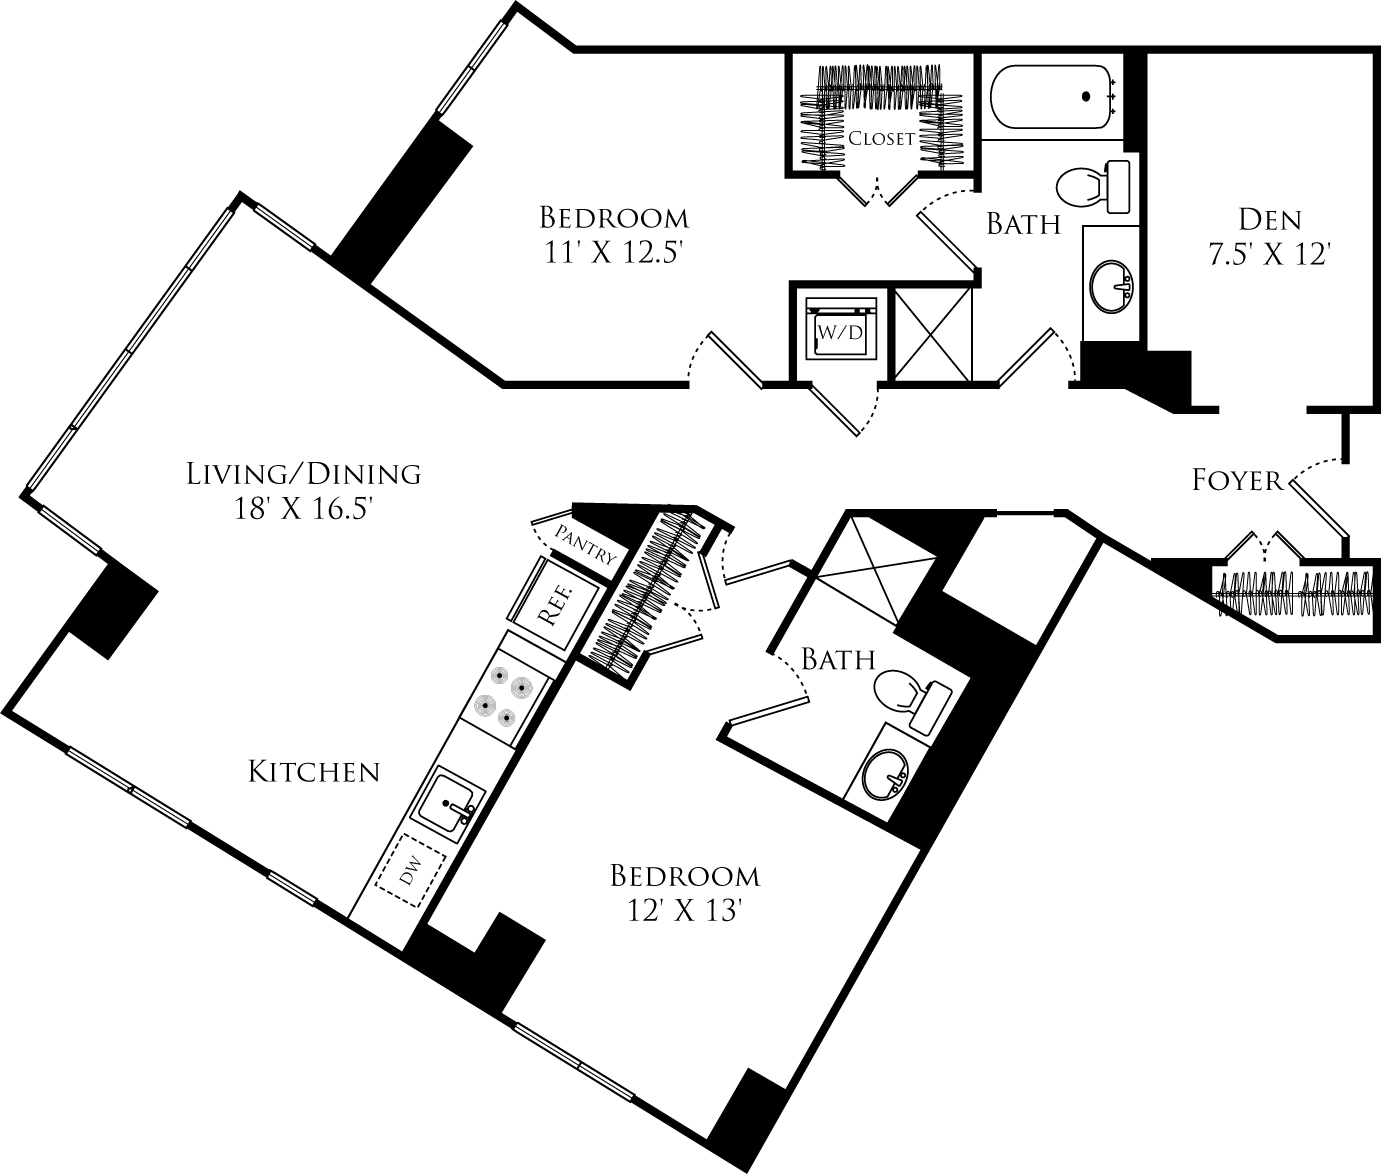 B2L+Den floor plan with 2 beds, 2 baths and is 1178 square feet